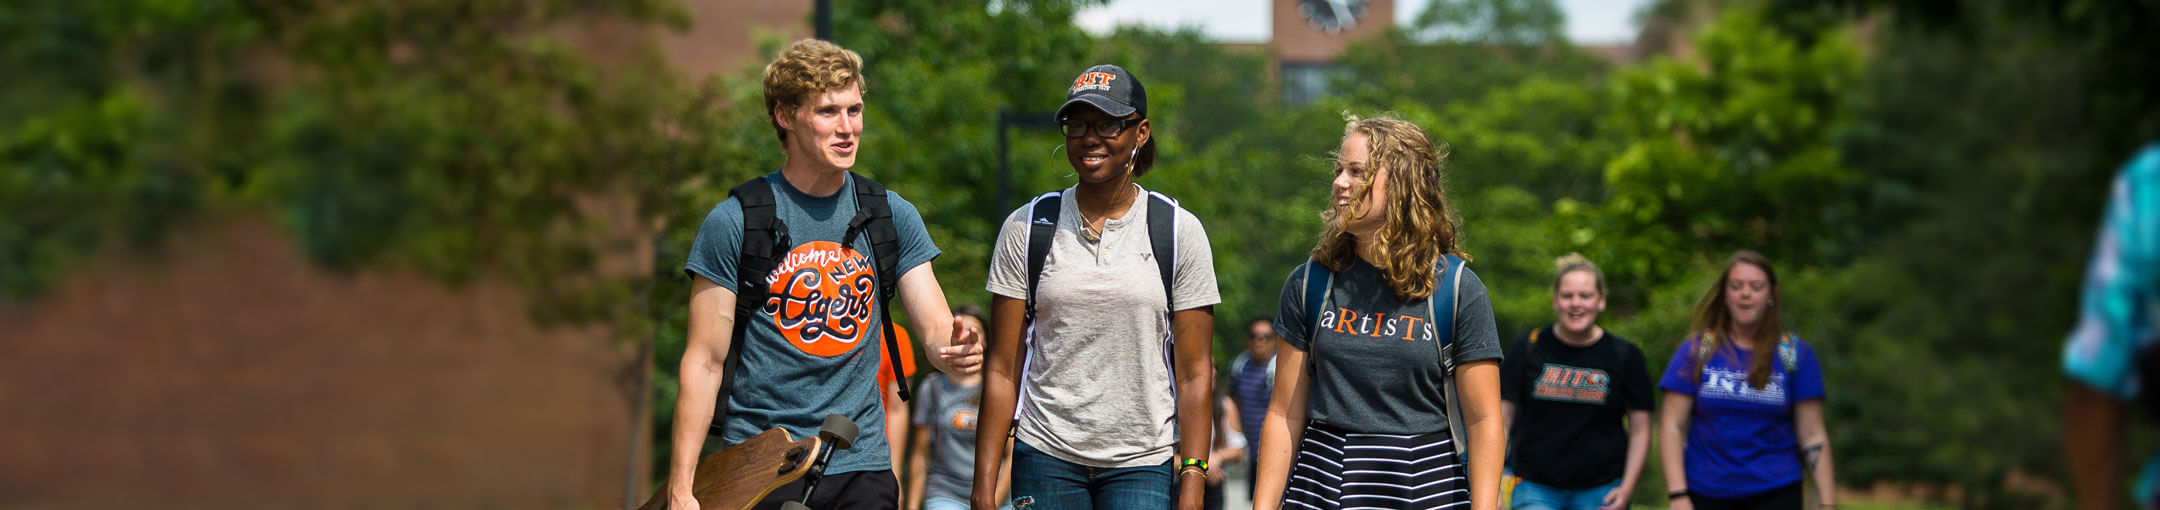 Students walking down the Quarter Mile walkway at RIT.